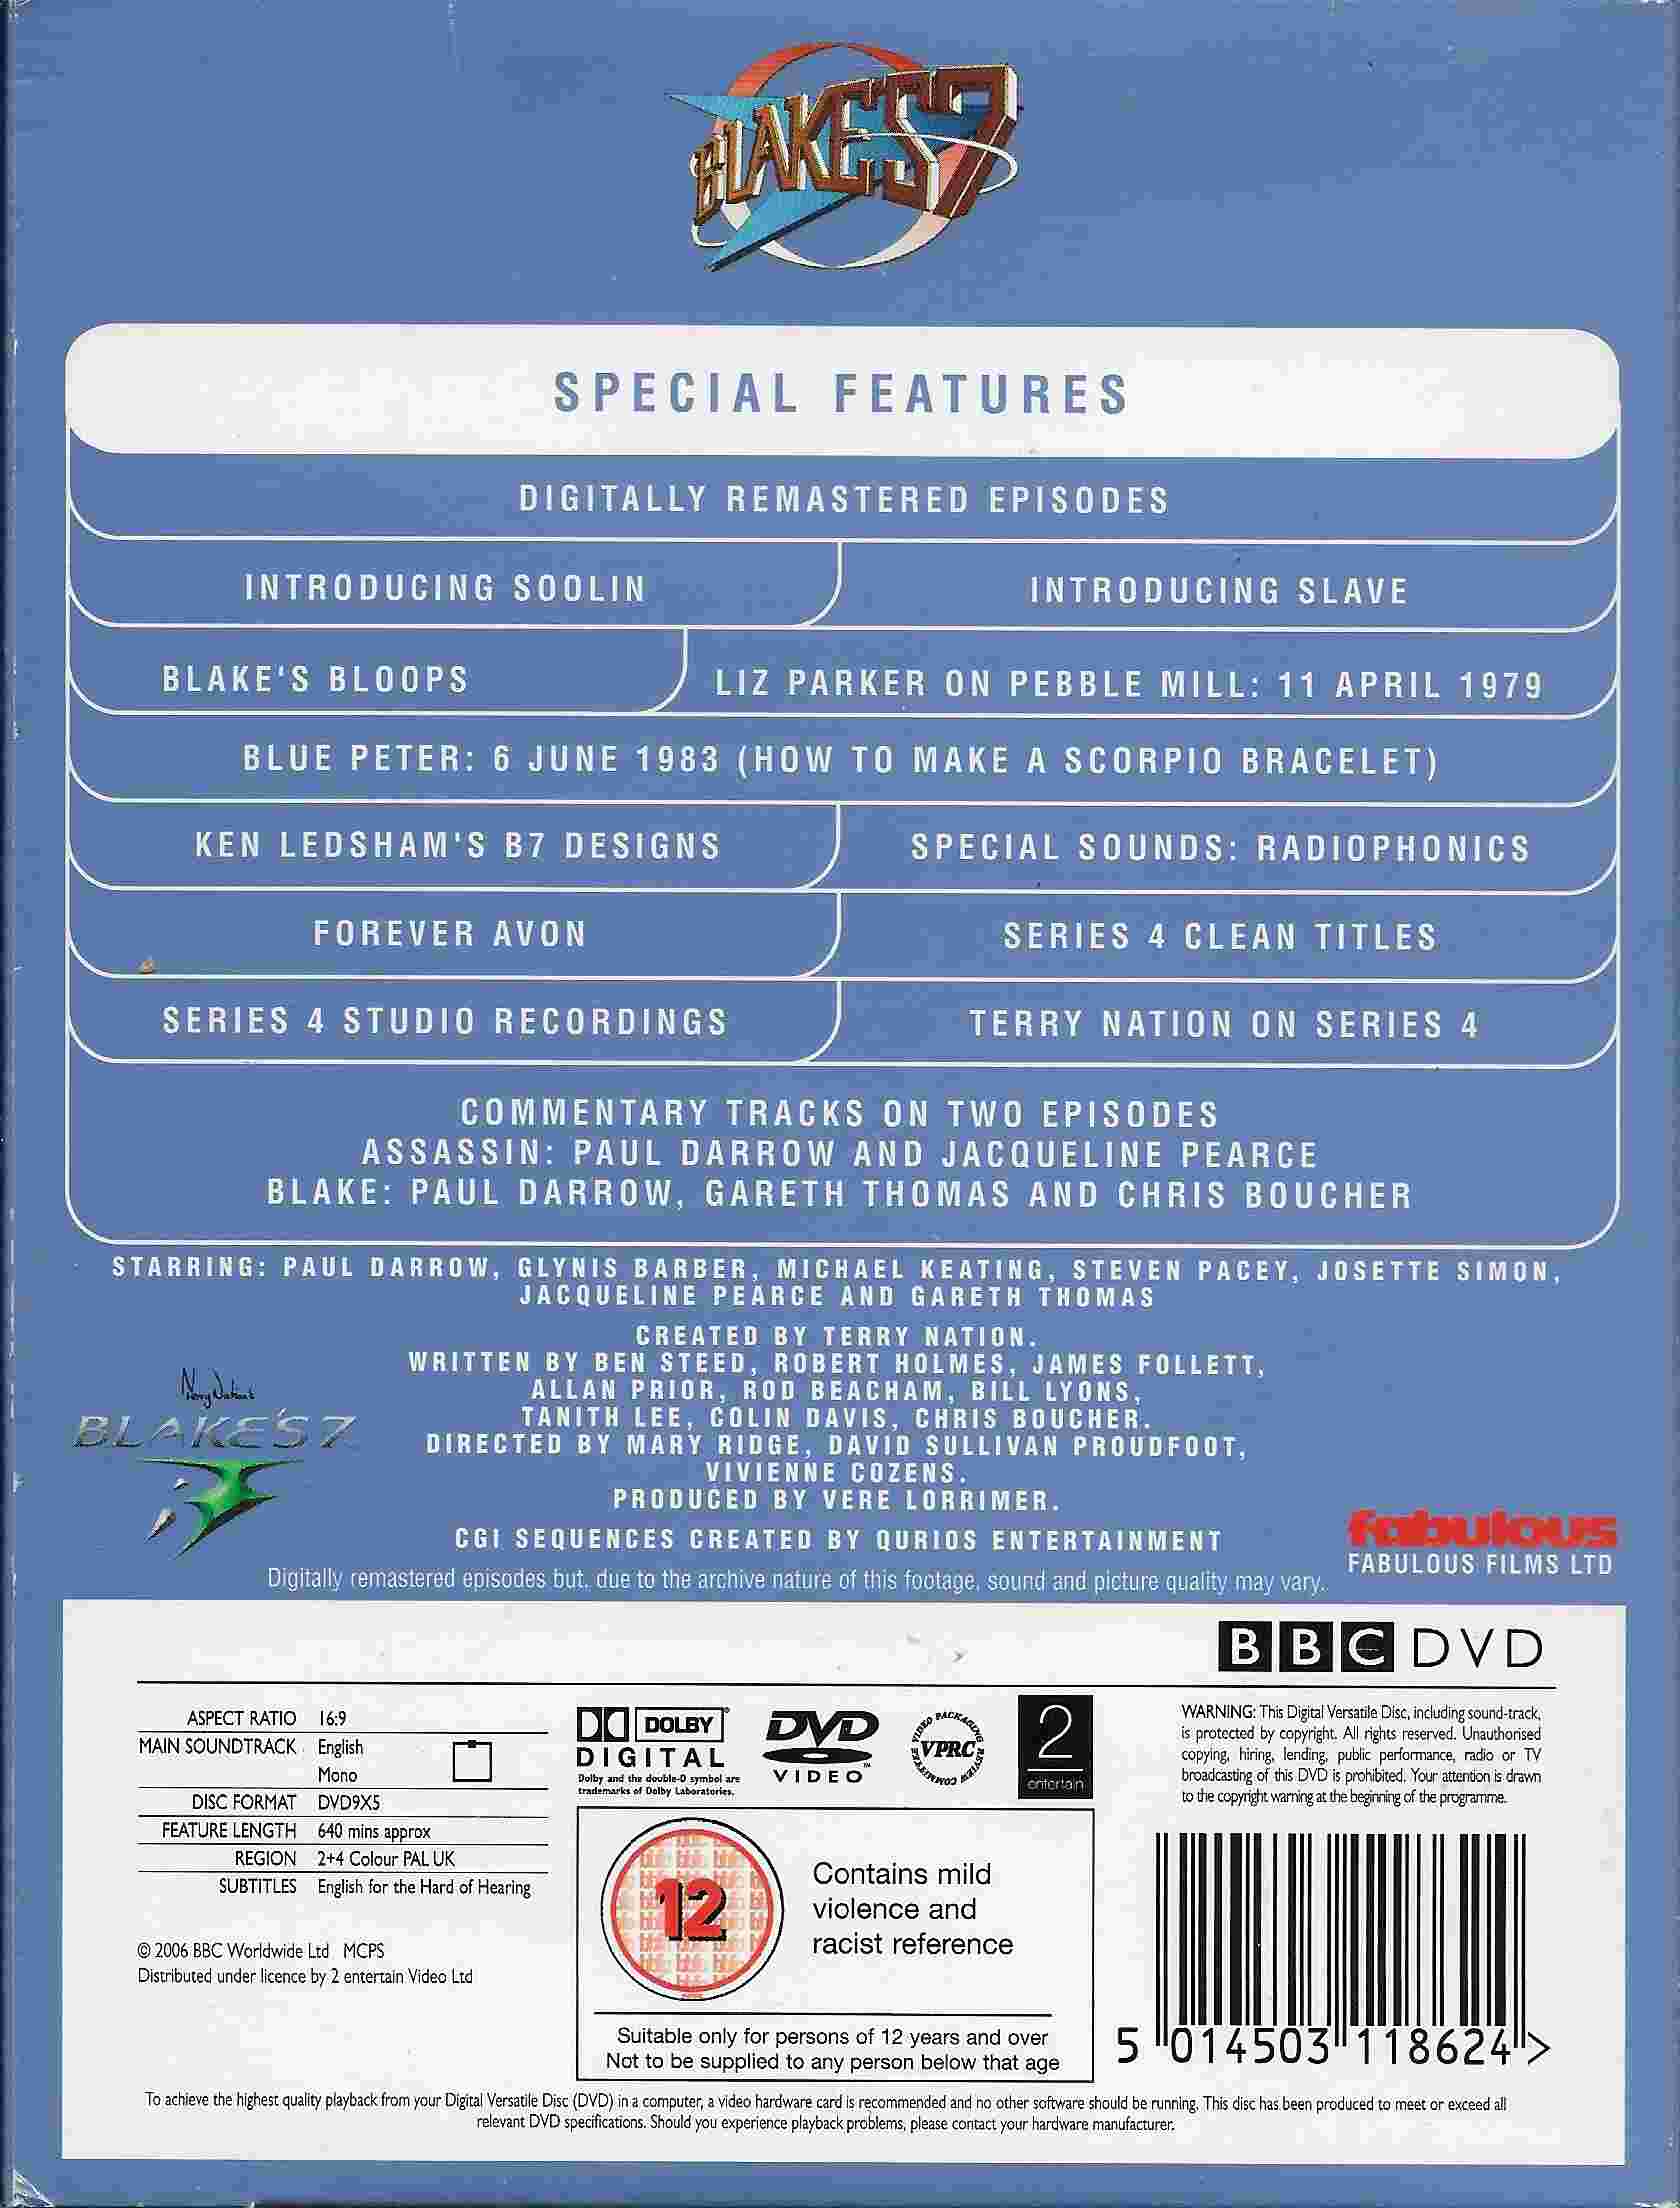 Picture of BBCDVD 1186 Blake's 7 - Series 4 by artist Chris Boucher / Ben Steed / Robert Holmes / James Follett / Allan Prior / Roger Parkes / Rod Beacham / Bill Lyons / Tanith Lee / Colin Davis / Simon Masters from the BBC records and Tapes library